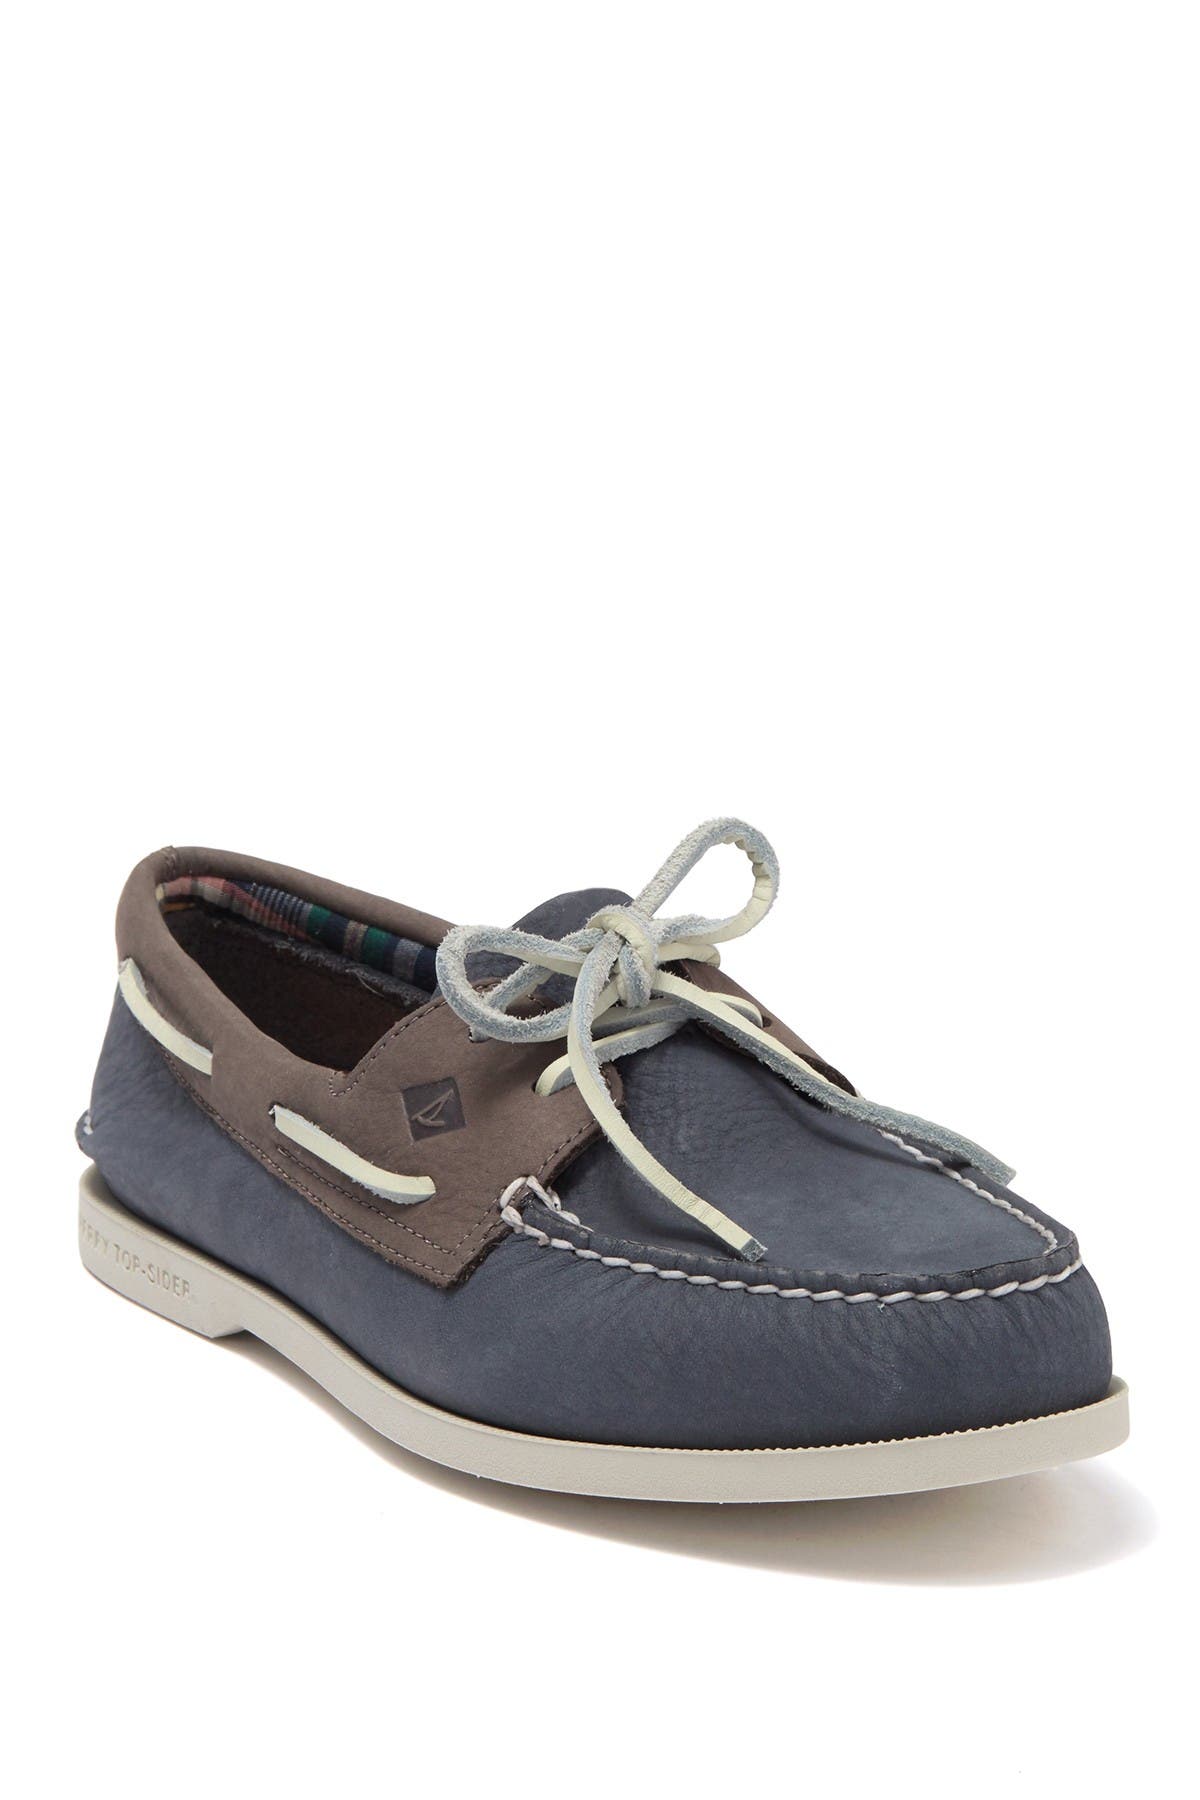 sperry washable boat shoes